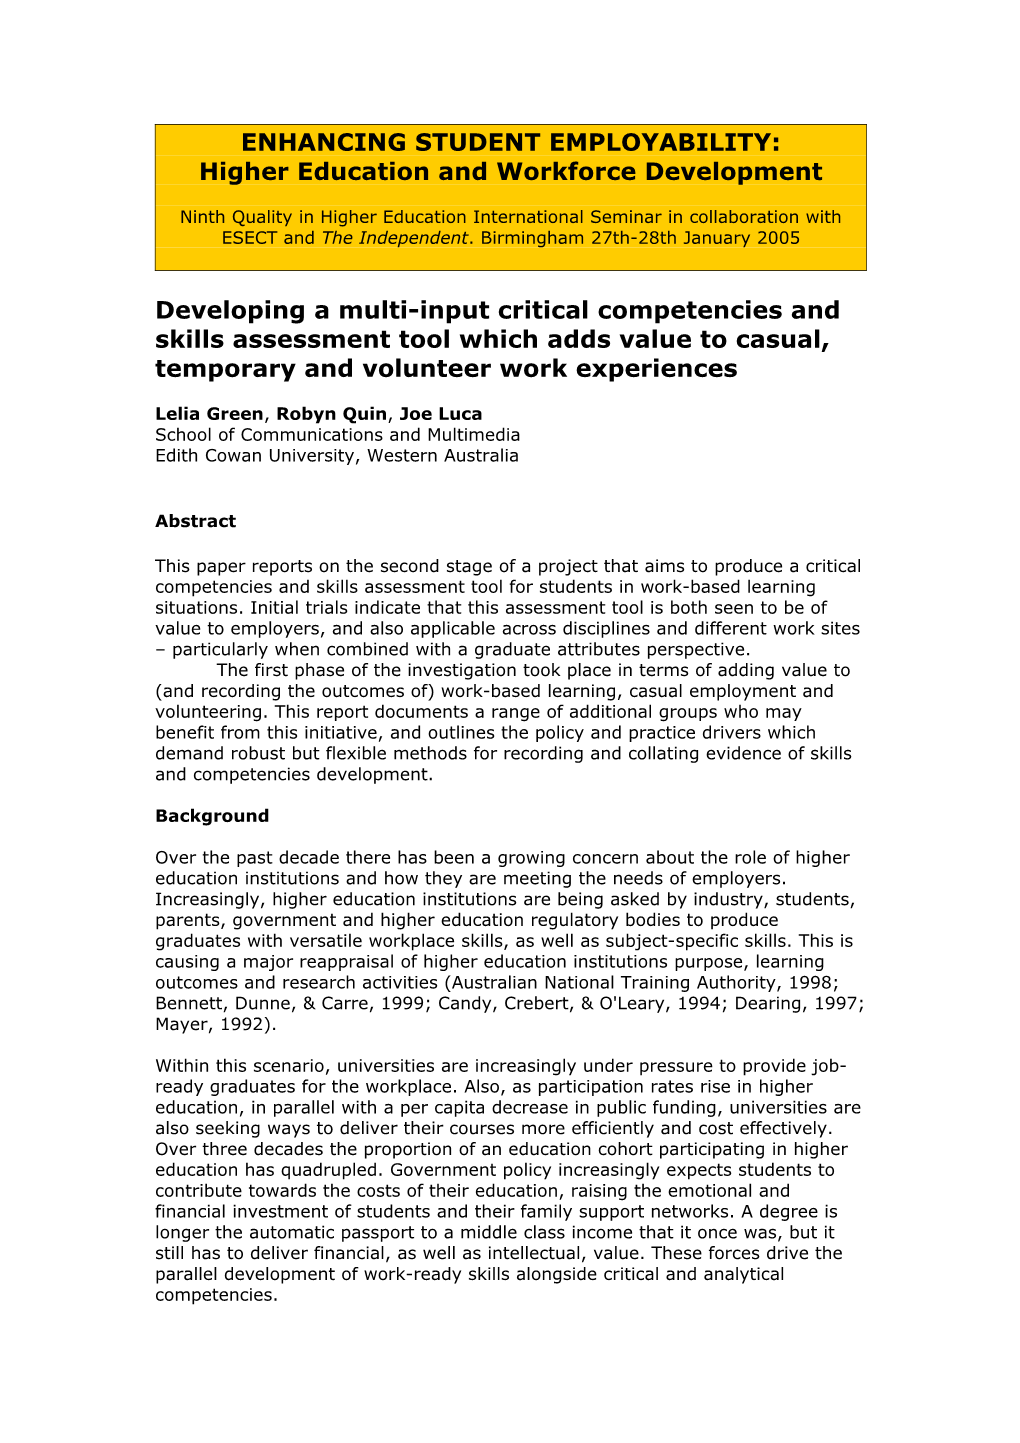 Developing a Multi-Input Critical Competencies and Skills Assessment Tool Which Adds Value